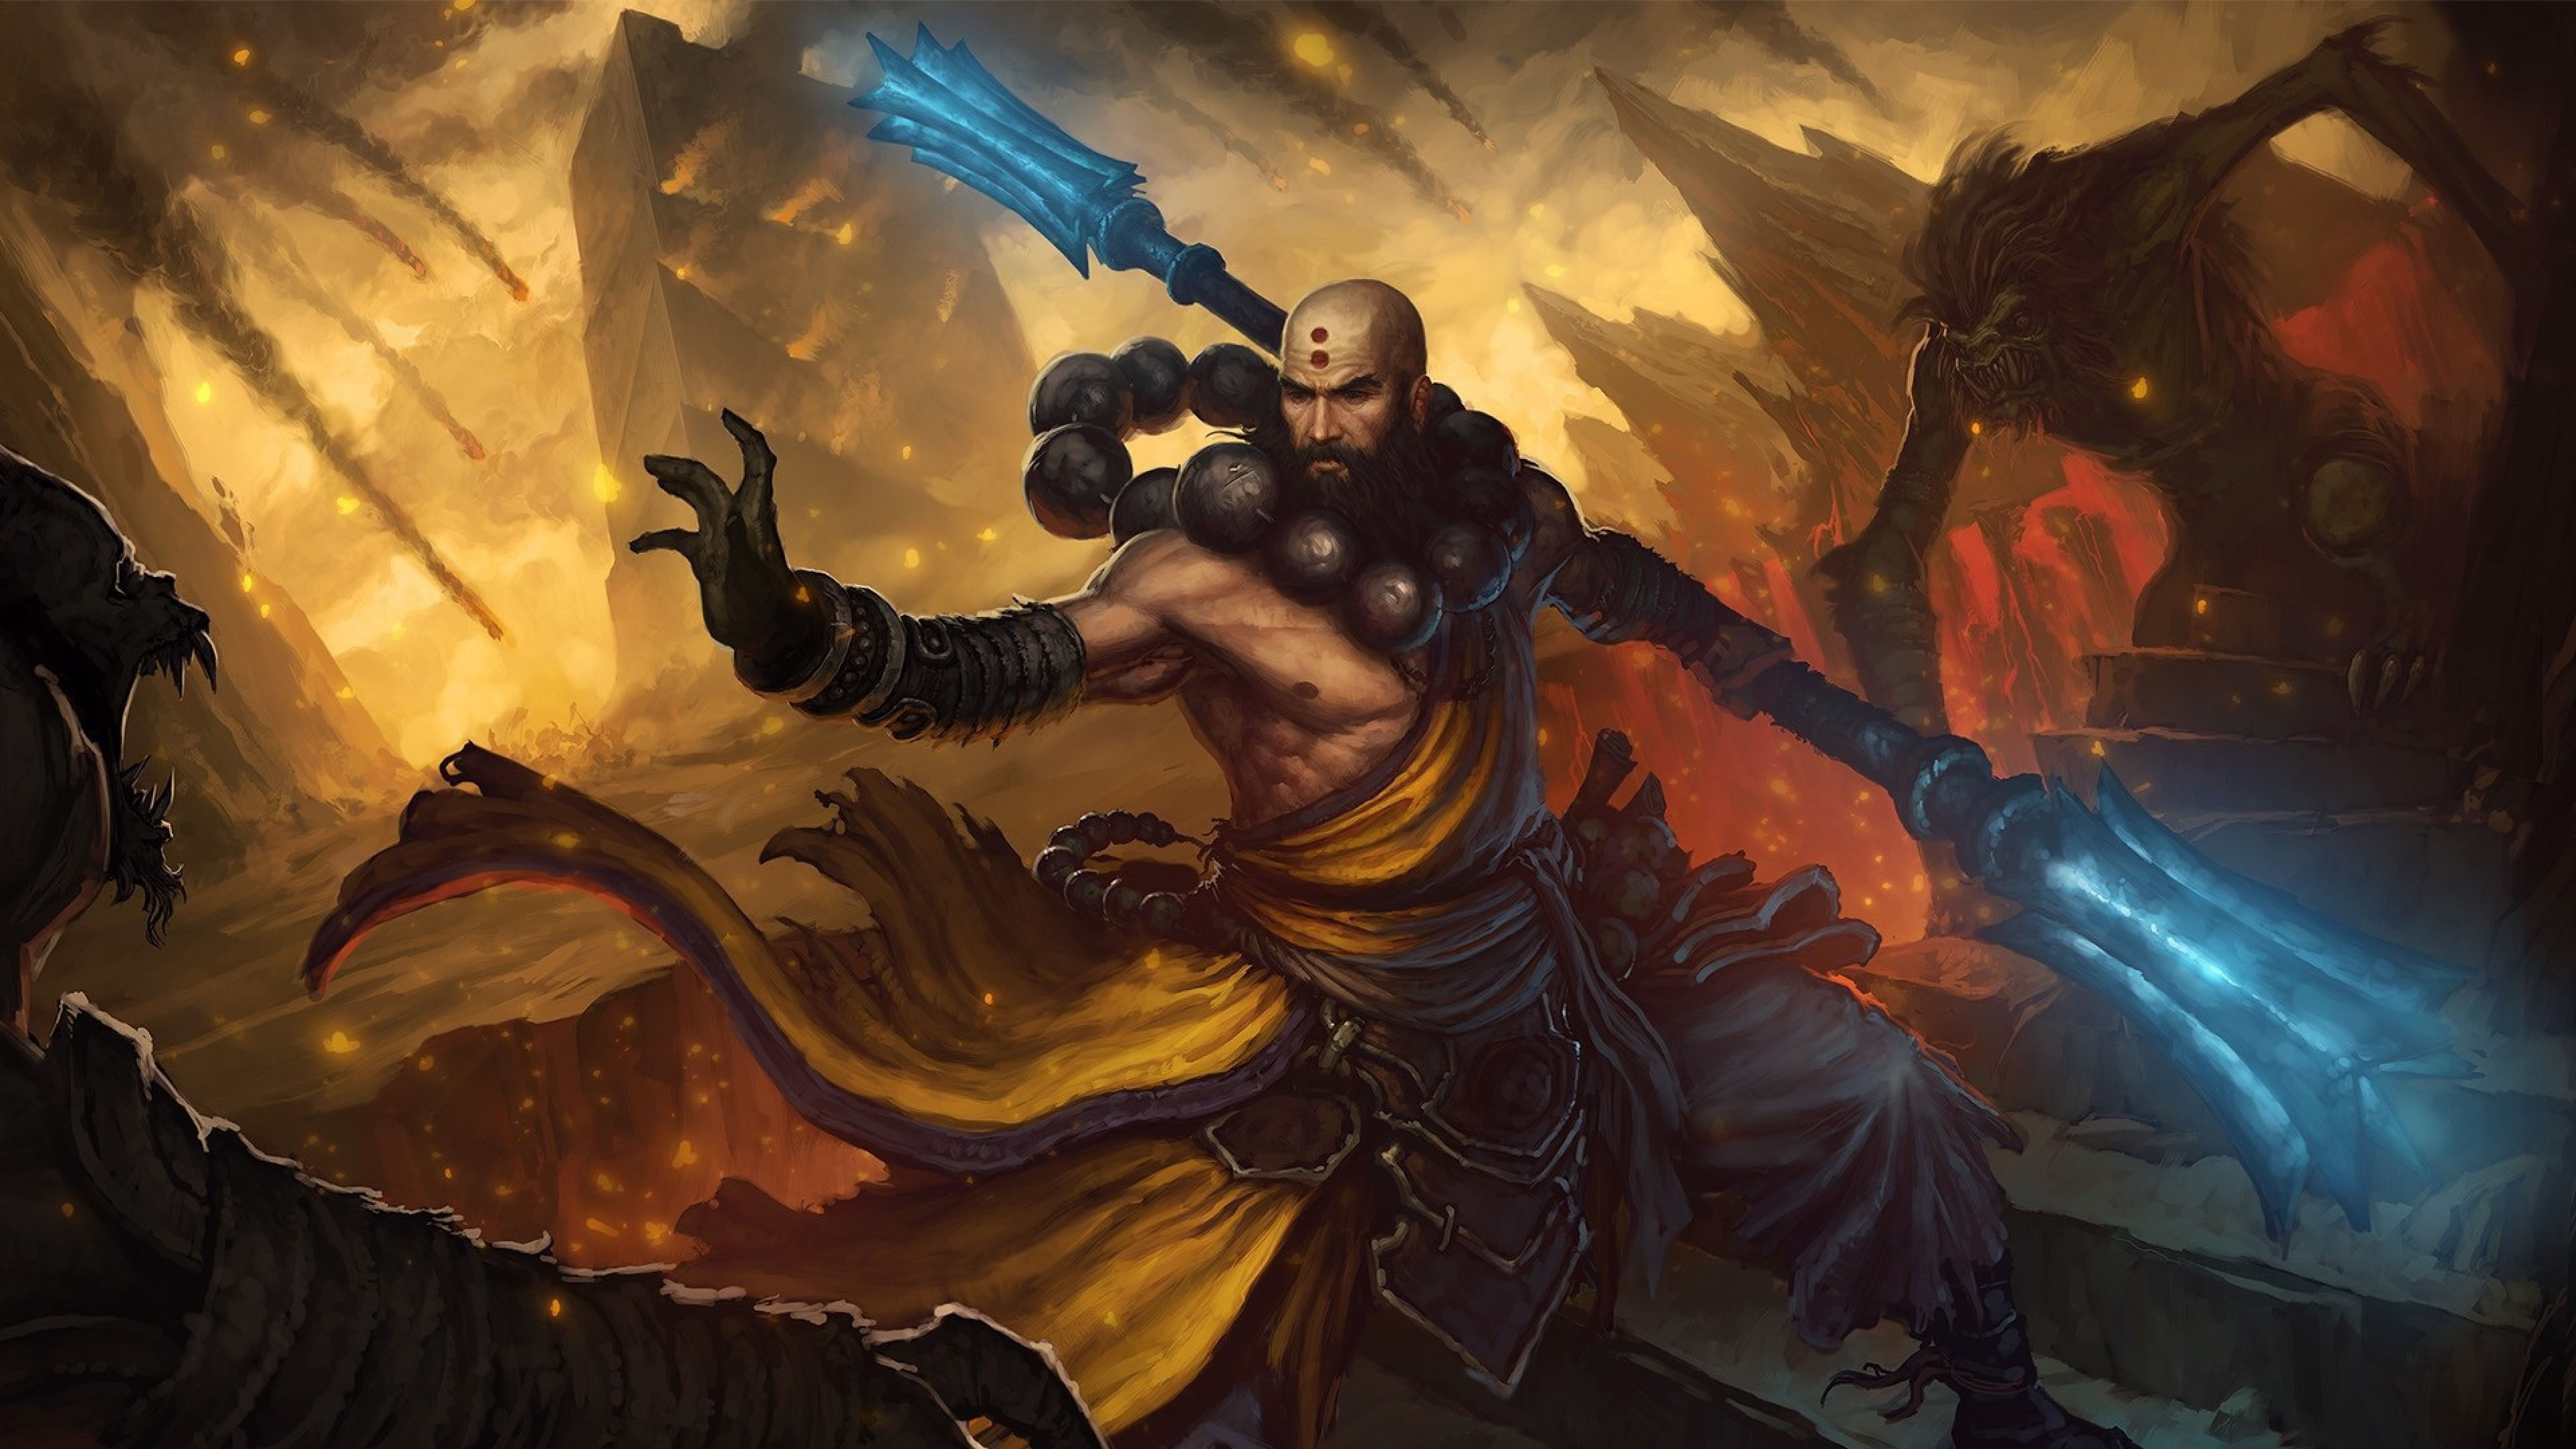 Diablo 3 Monk Class Official Illustration from 2012